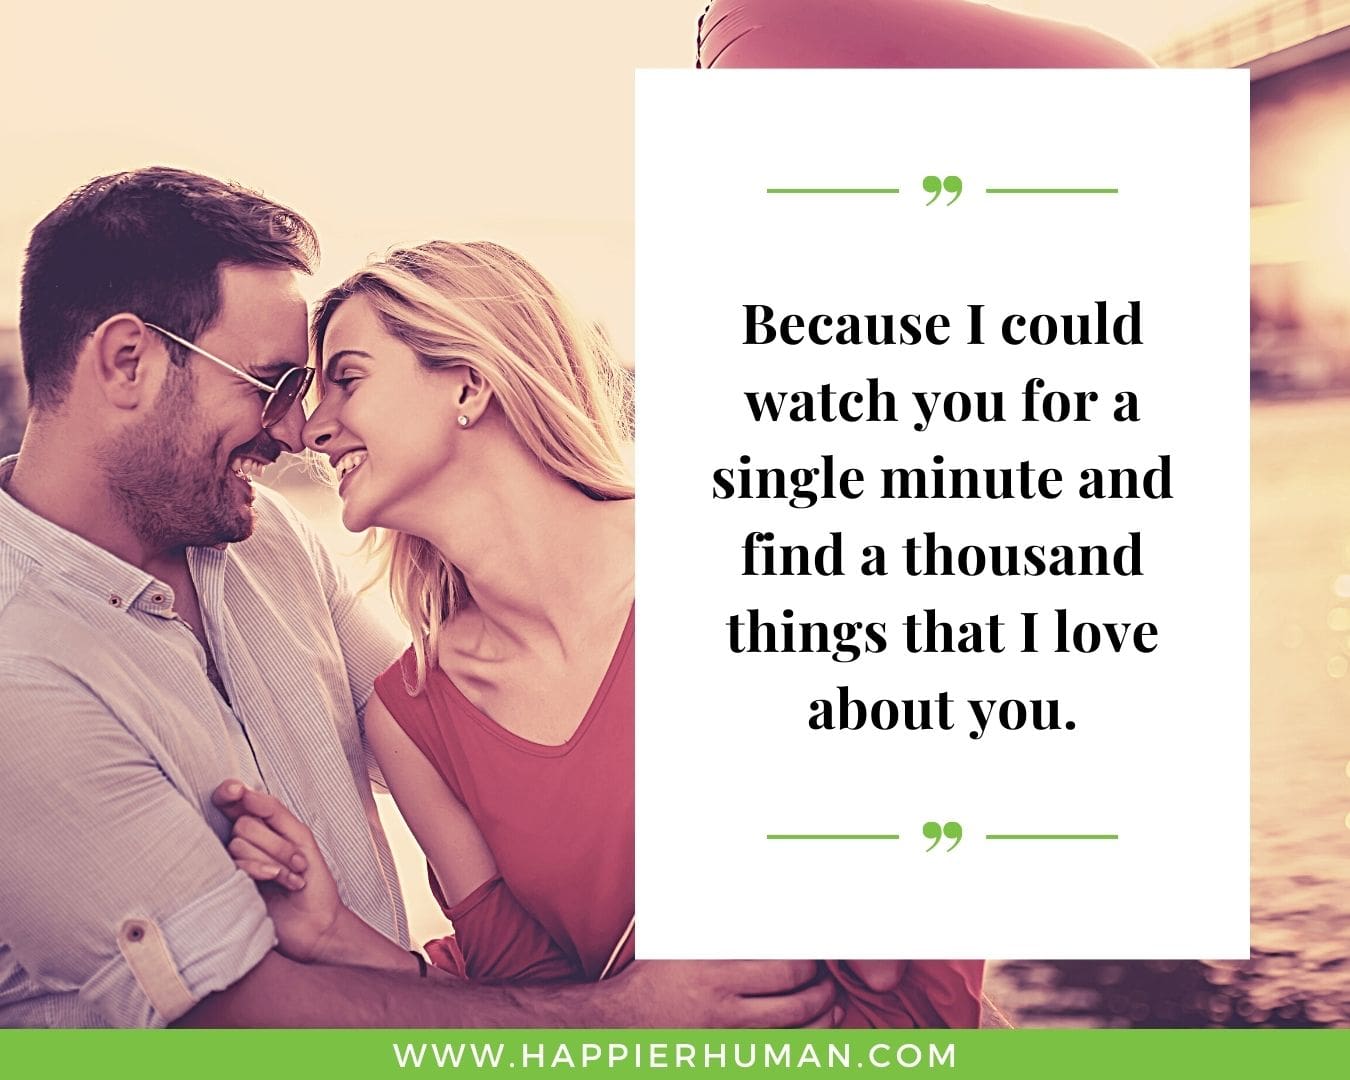 Unconditional Love Quotes for Her - “Because I could watch you for a single minute and find a thousand things that I love about you.”